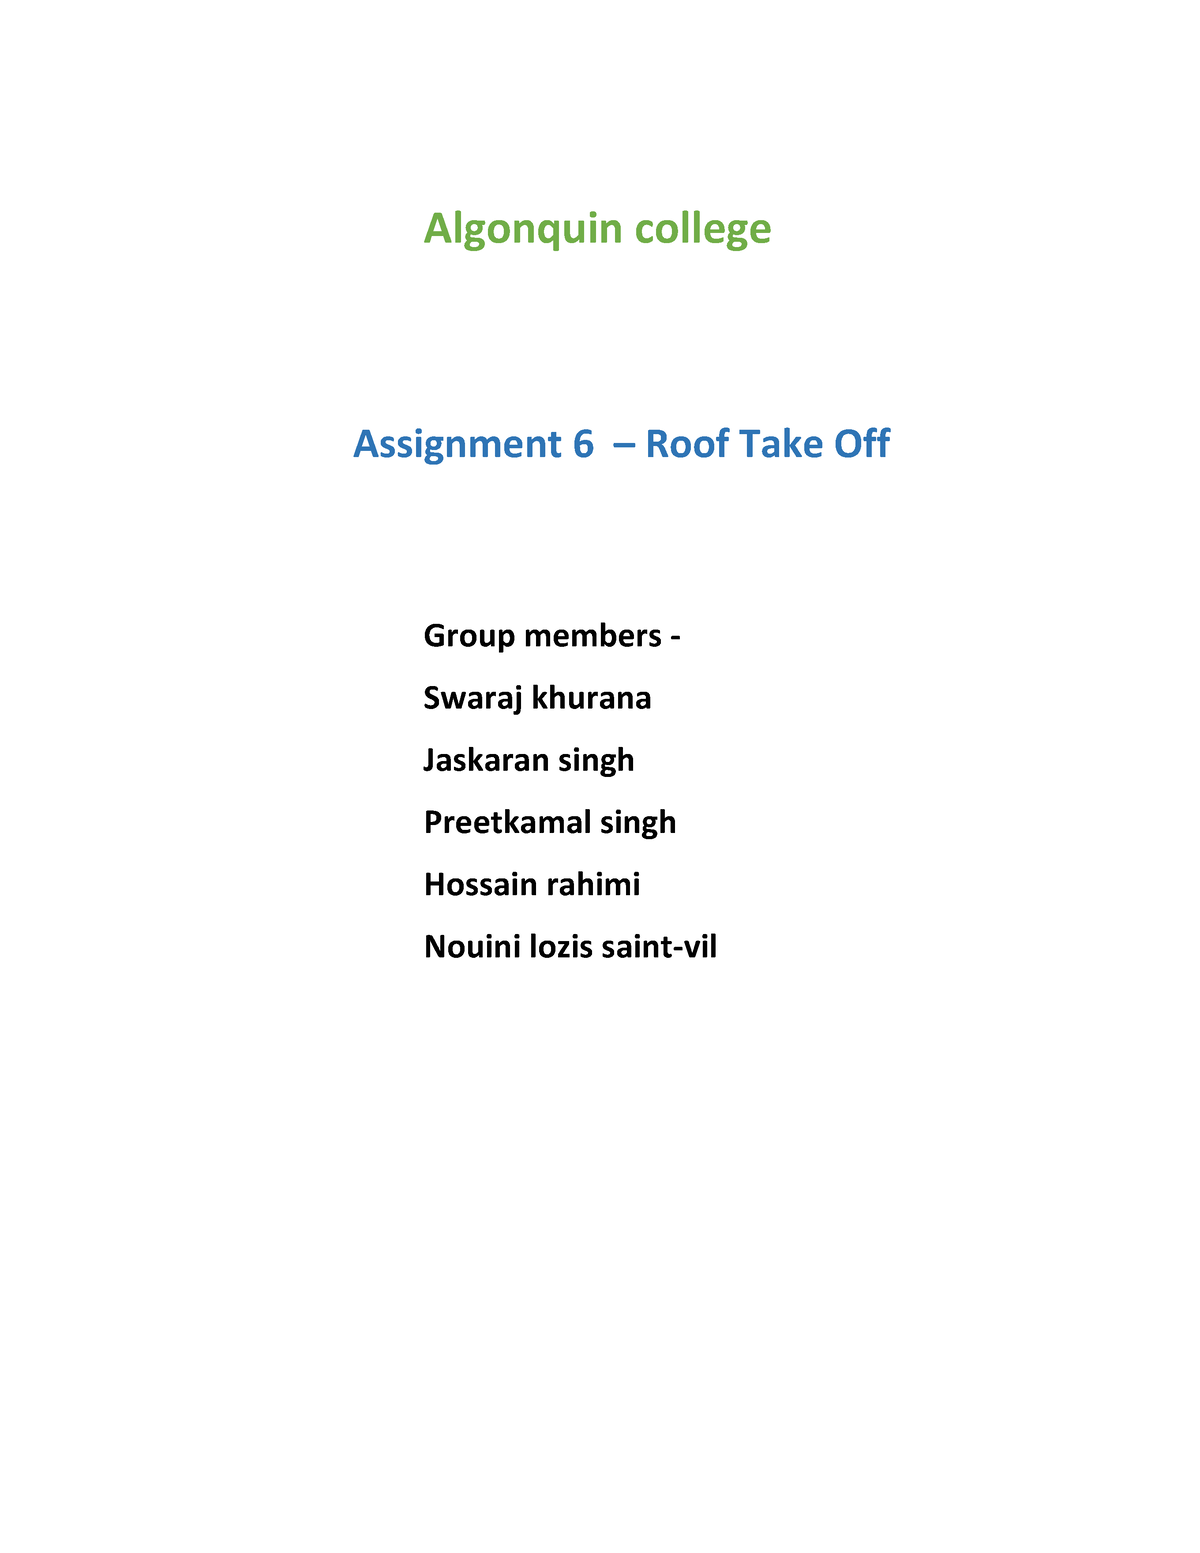 algonquin college late assignment policy